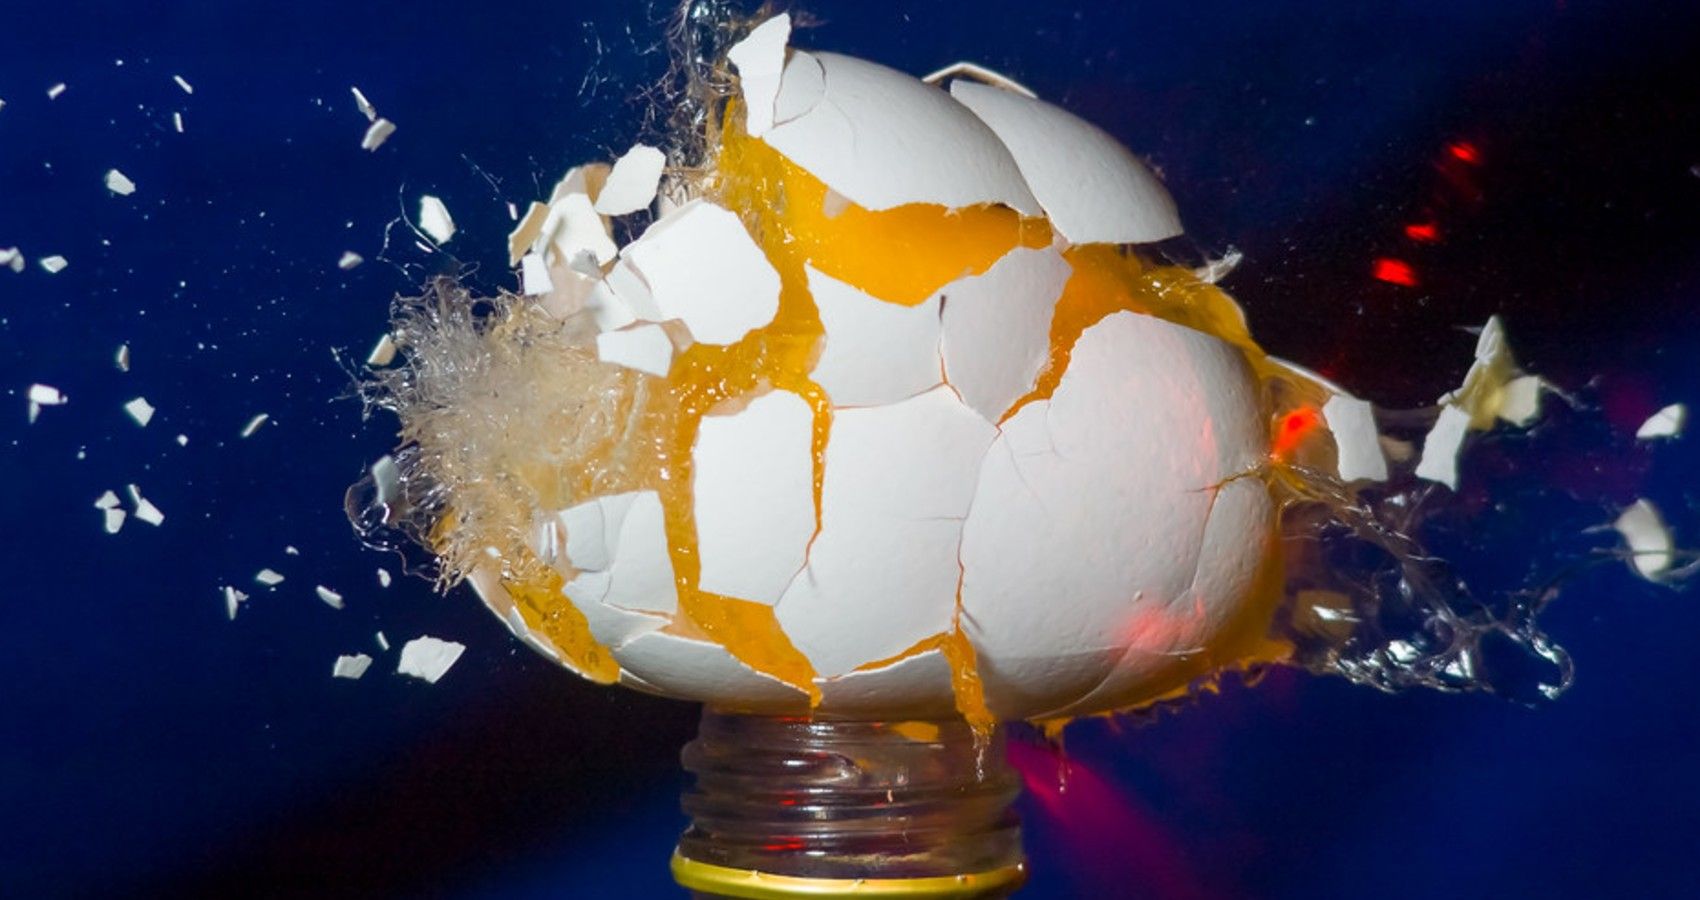 An egg getting shot and exploding